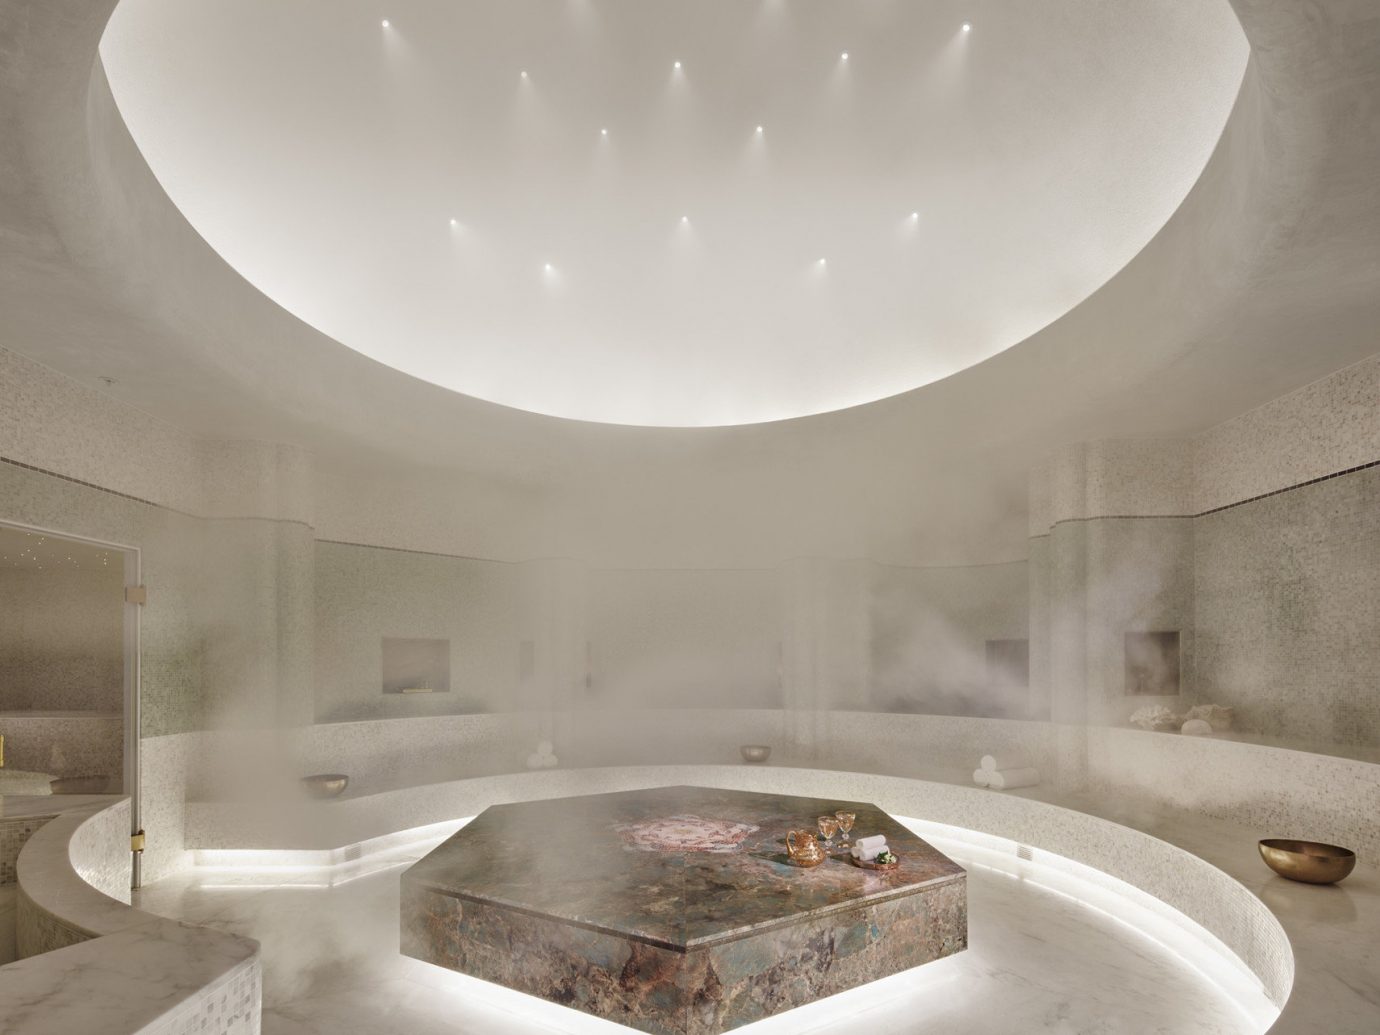 ambient lighting chic clean Health + Wellness Hotels Luxury marble private relaxation sauna Spa Spa Retreats steam room white indoor wall ceiling room floor daylighting bathtub lighting plumbing fixture bathroom swimming pool interior design shape Design jacuzzi table porcelain